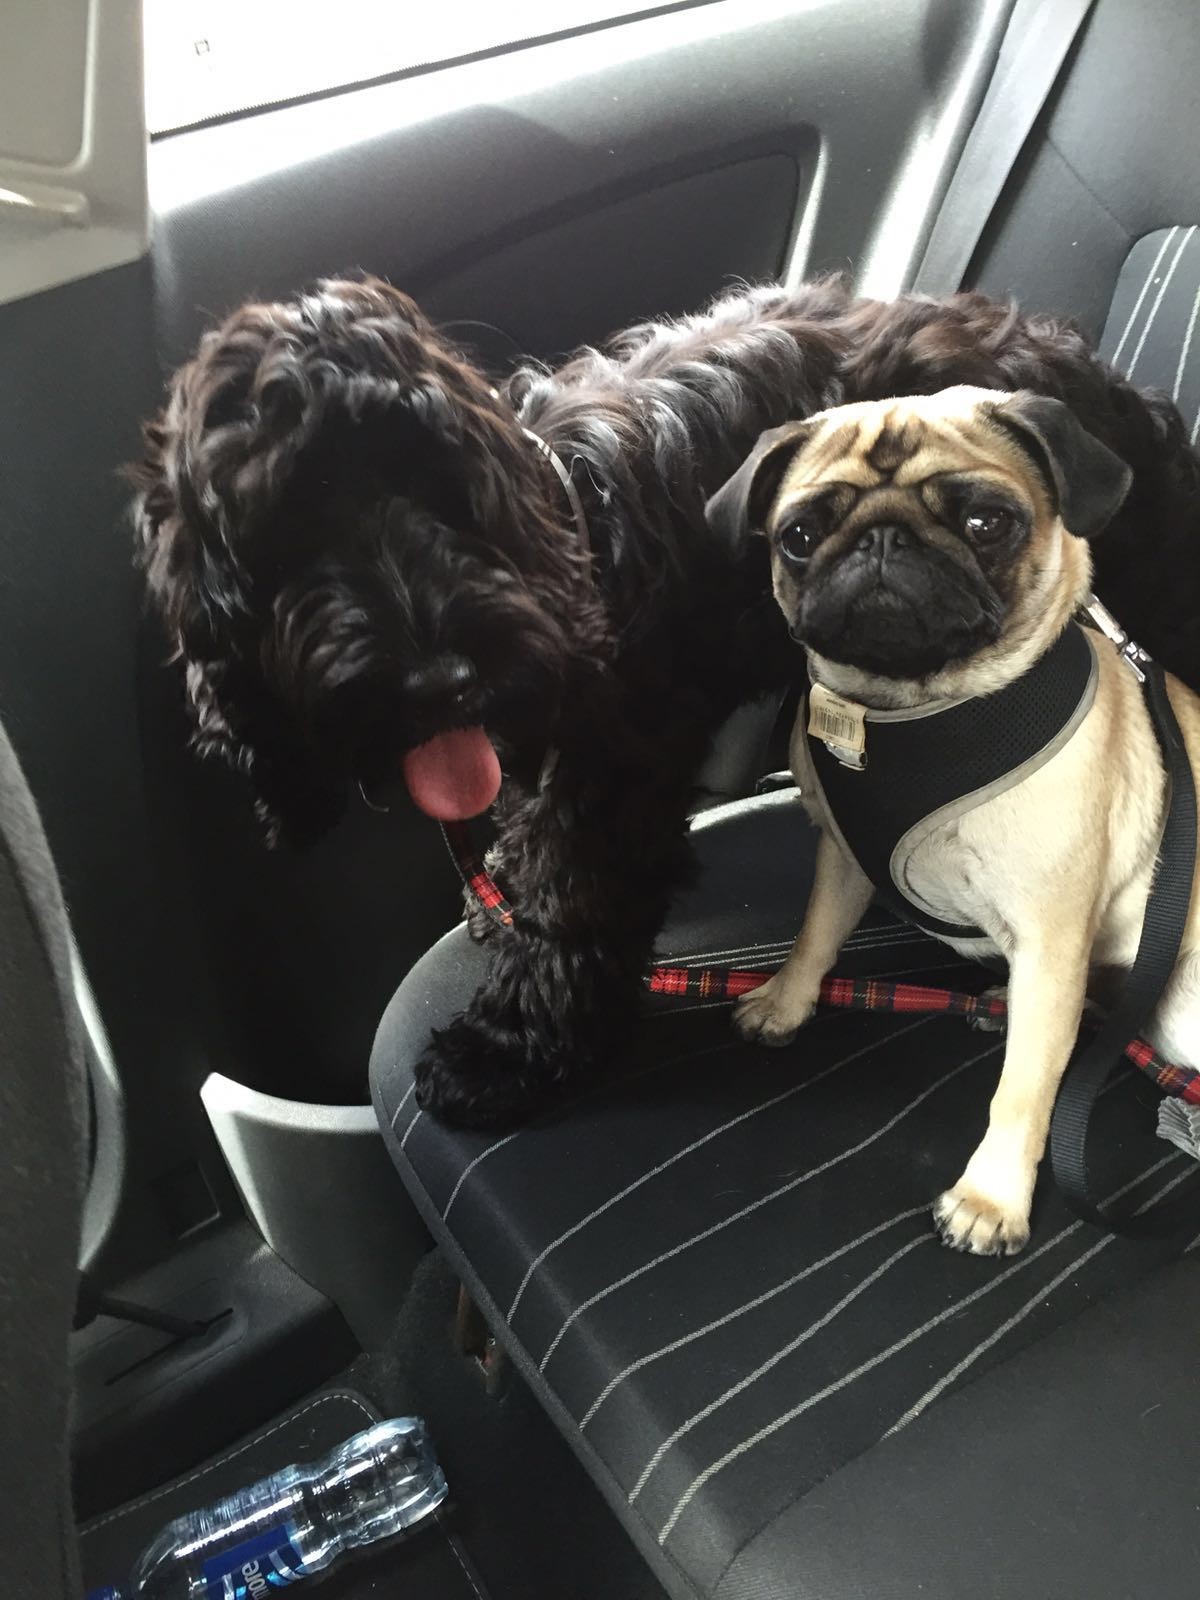 Hannah sent us in this adorable picture of Bo and Leia for Robert Burns 'The Twa Dugs'